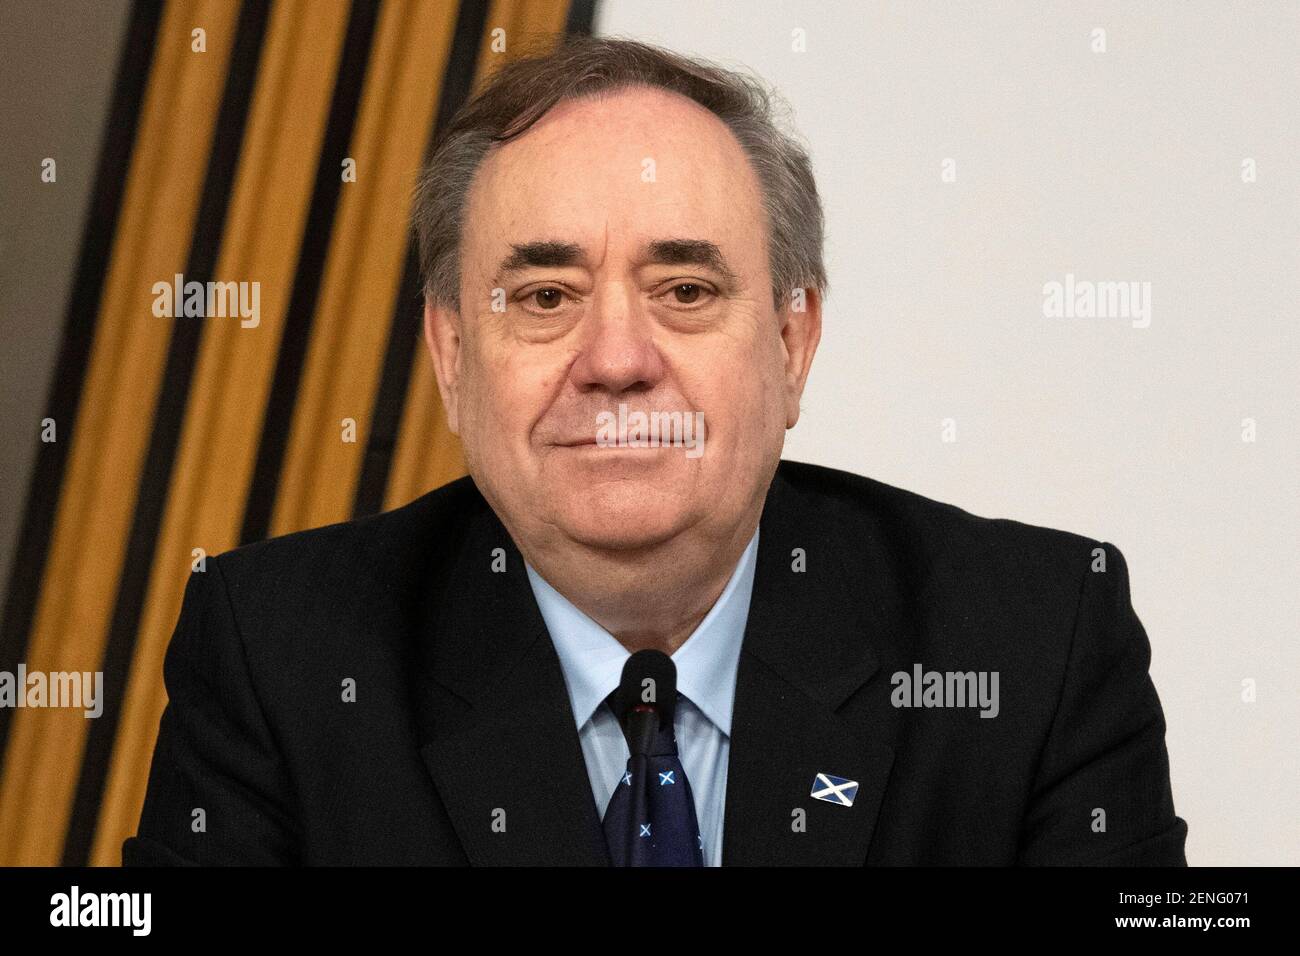 Former Scottish National Party leader and former First Minister of Scotland, Alex Salmond is sworn in before giving evidence to The Committee on the Scottish Government Handling of Harassment Complaints at Holyrood, examining the government's handling of harassment allegations against him, in Edinburgh, Scotland, Britain February 26, 2021.  Andy Buchanan/Pool via REUTERS Stock Photo